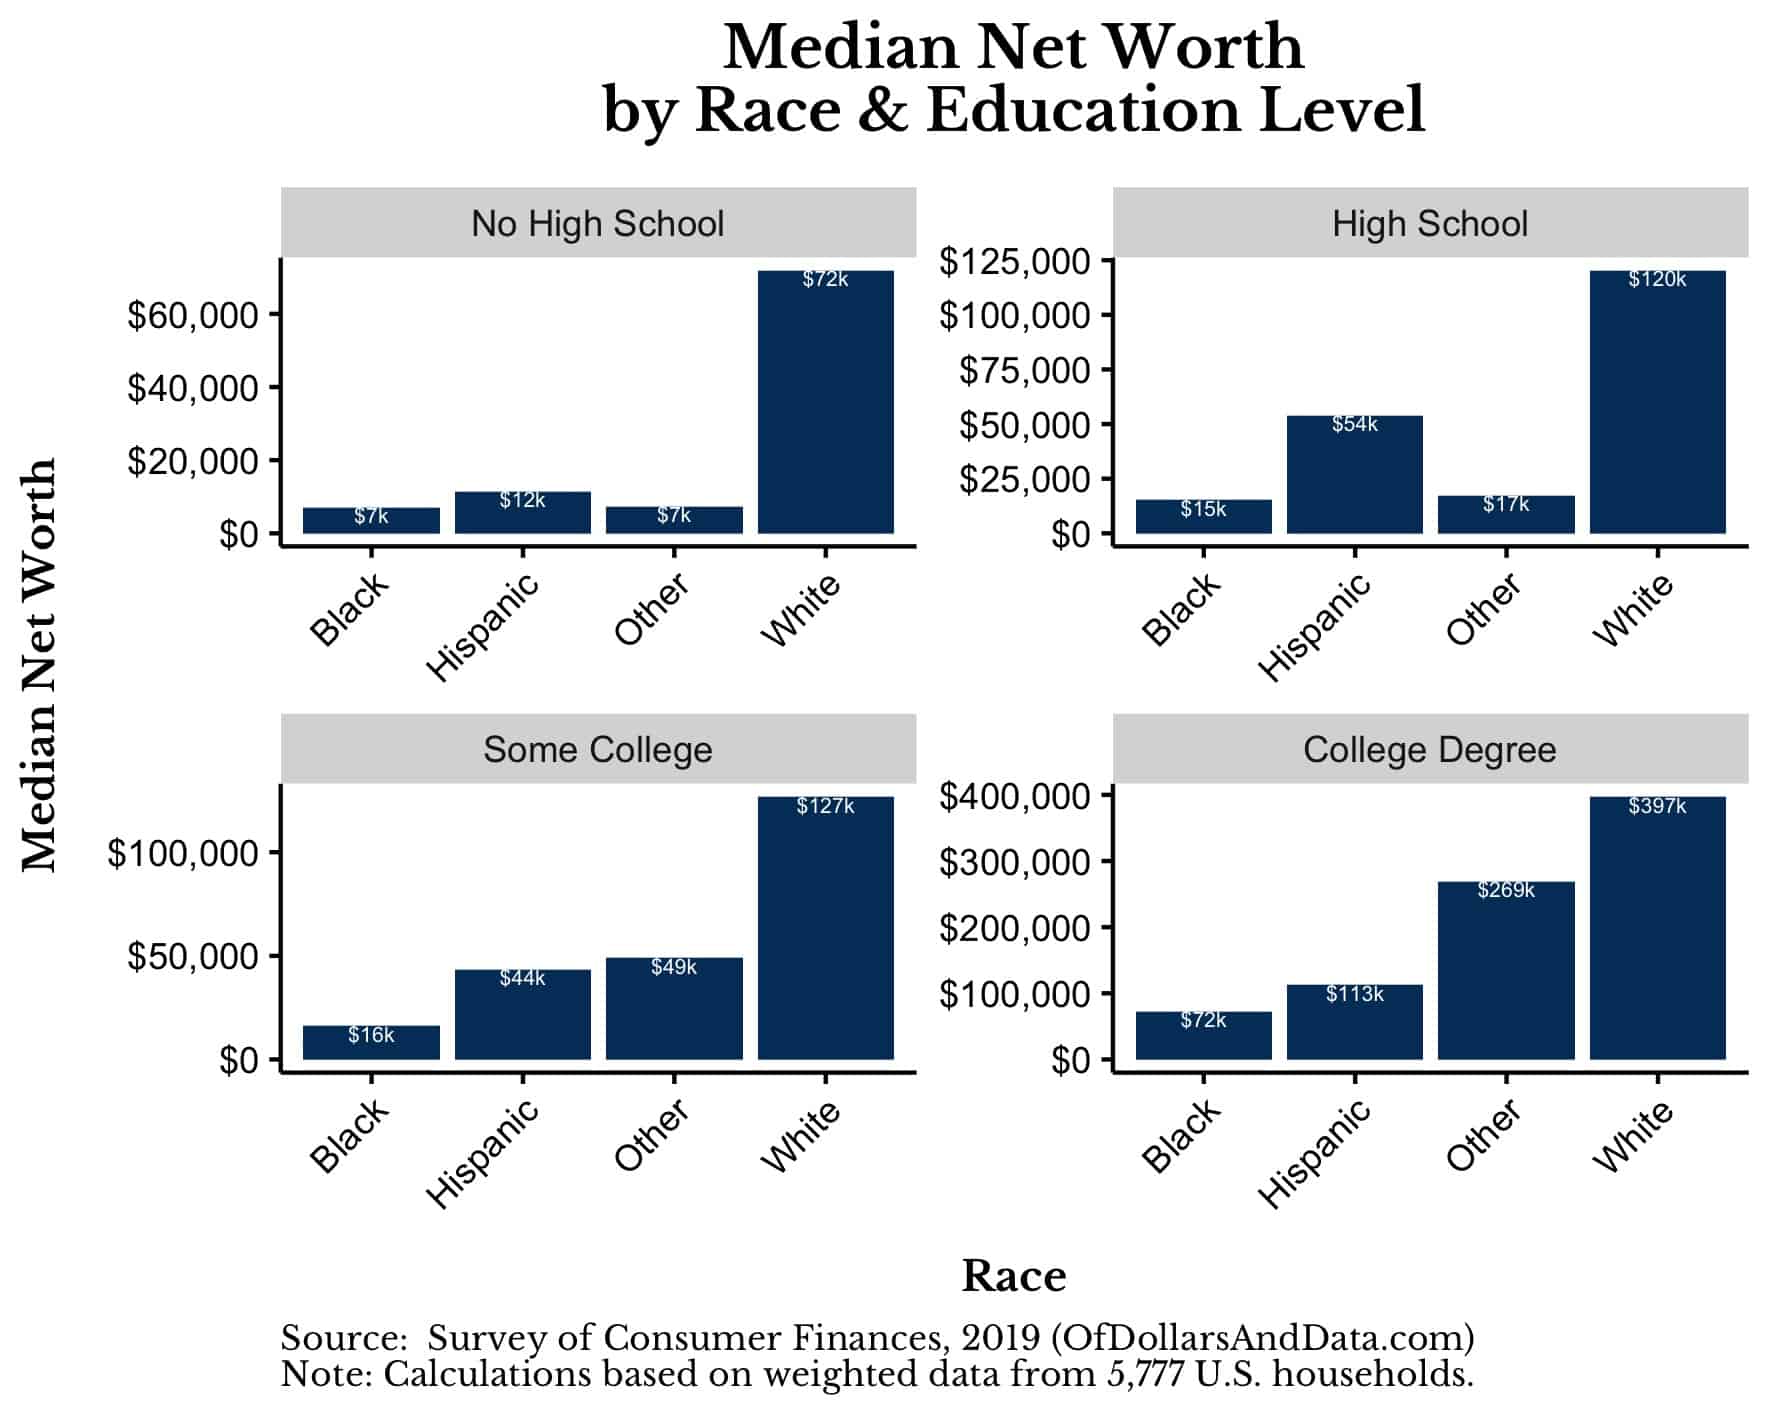 Median net worth by race and education level, 2019 Survey of Consumer Finances